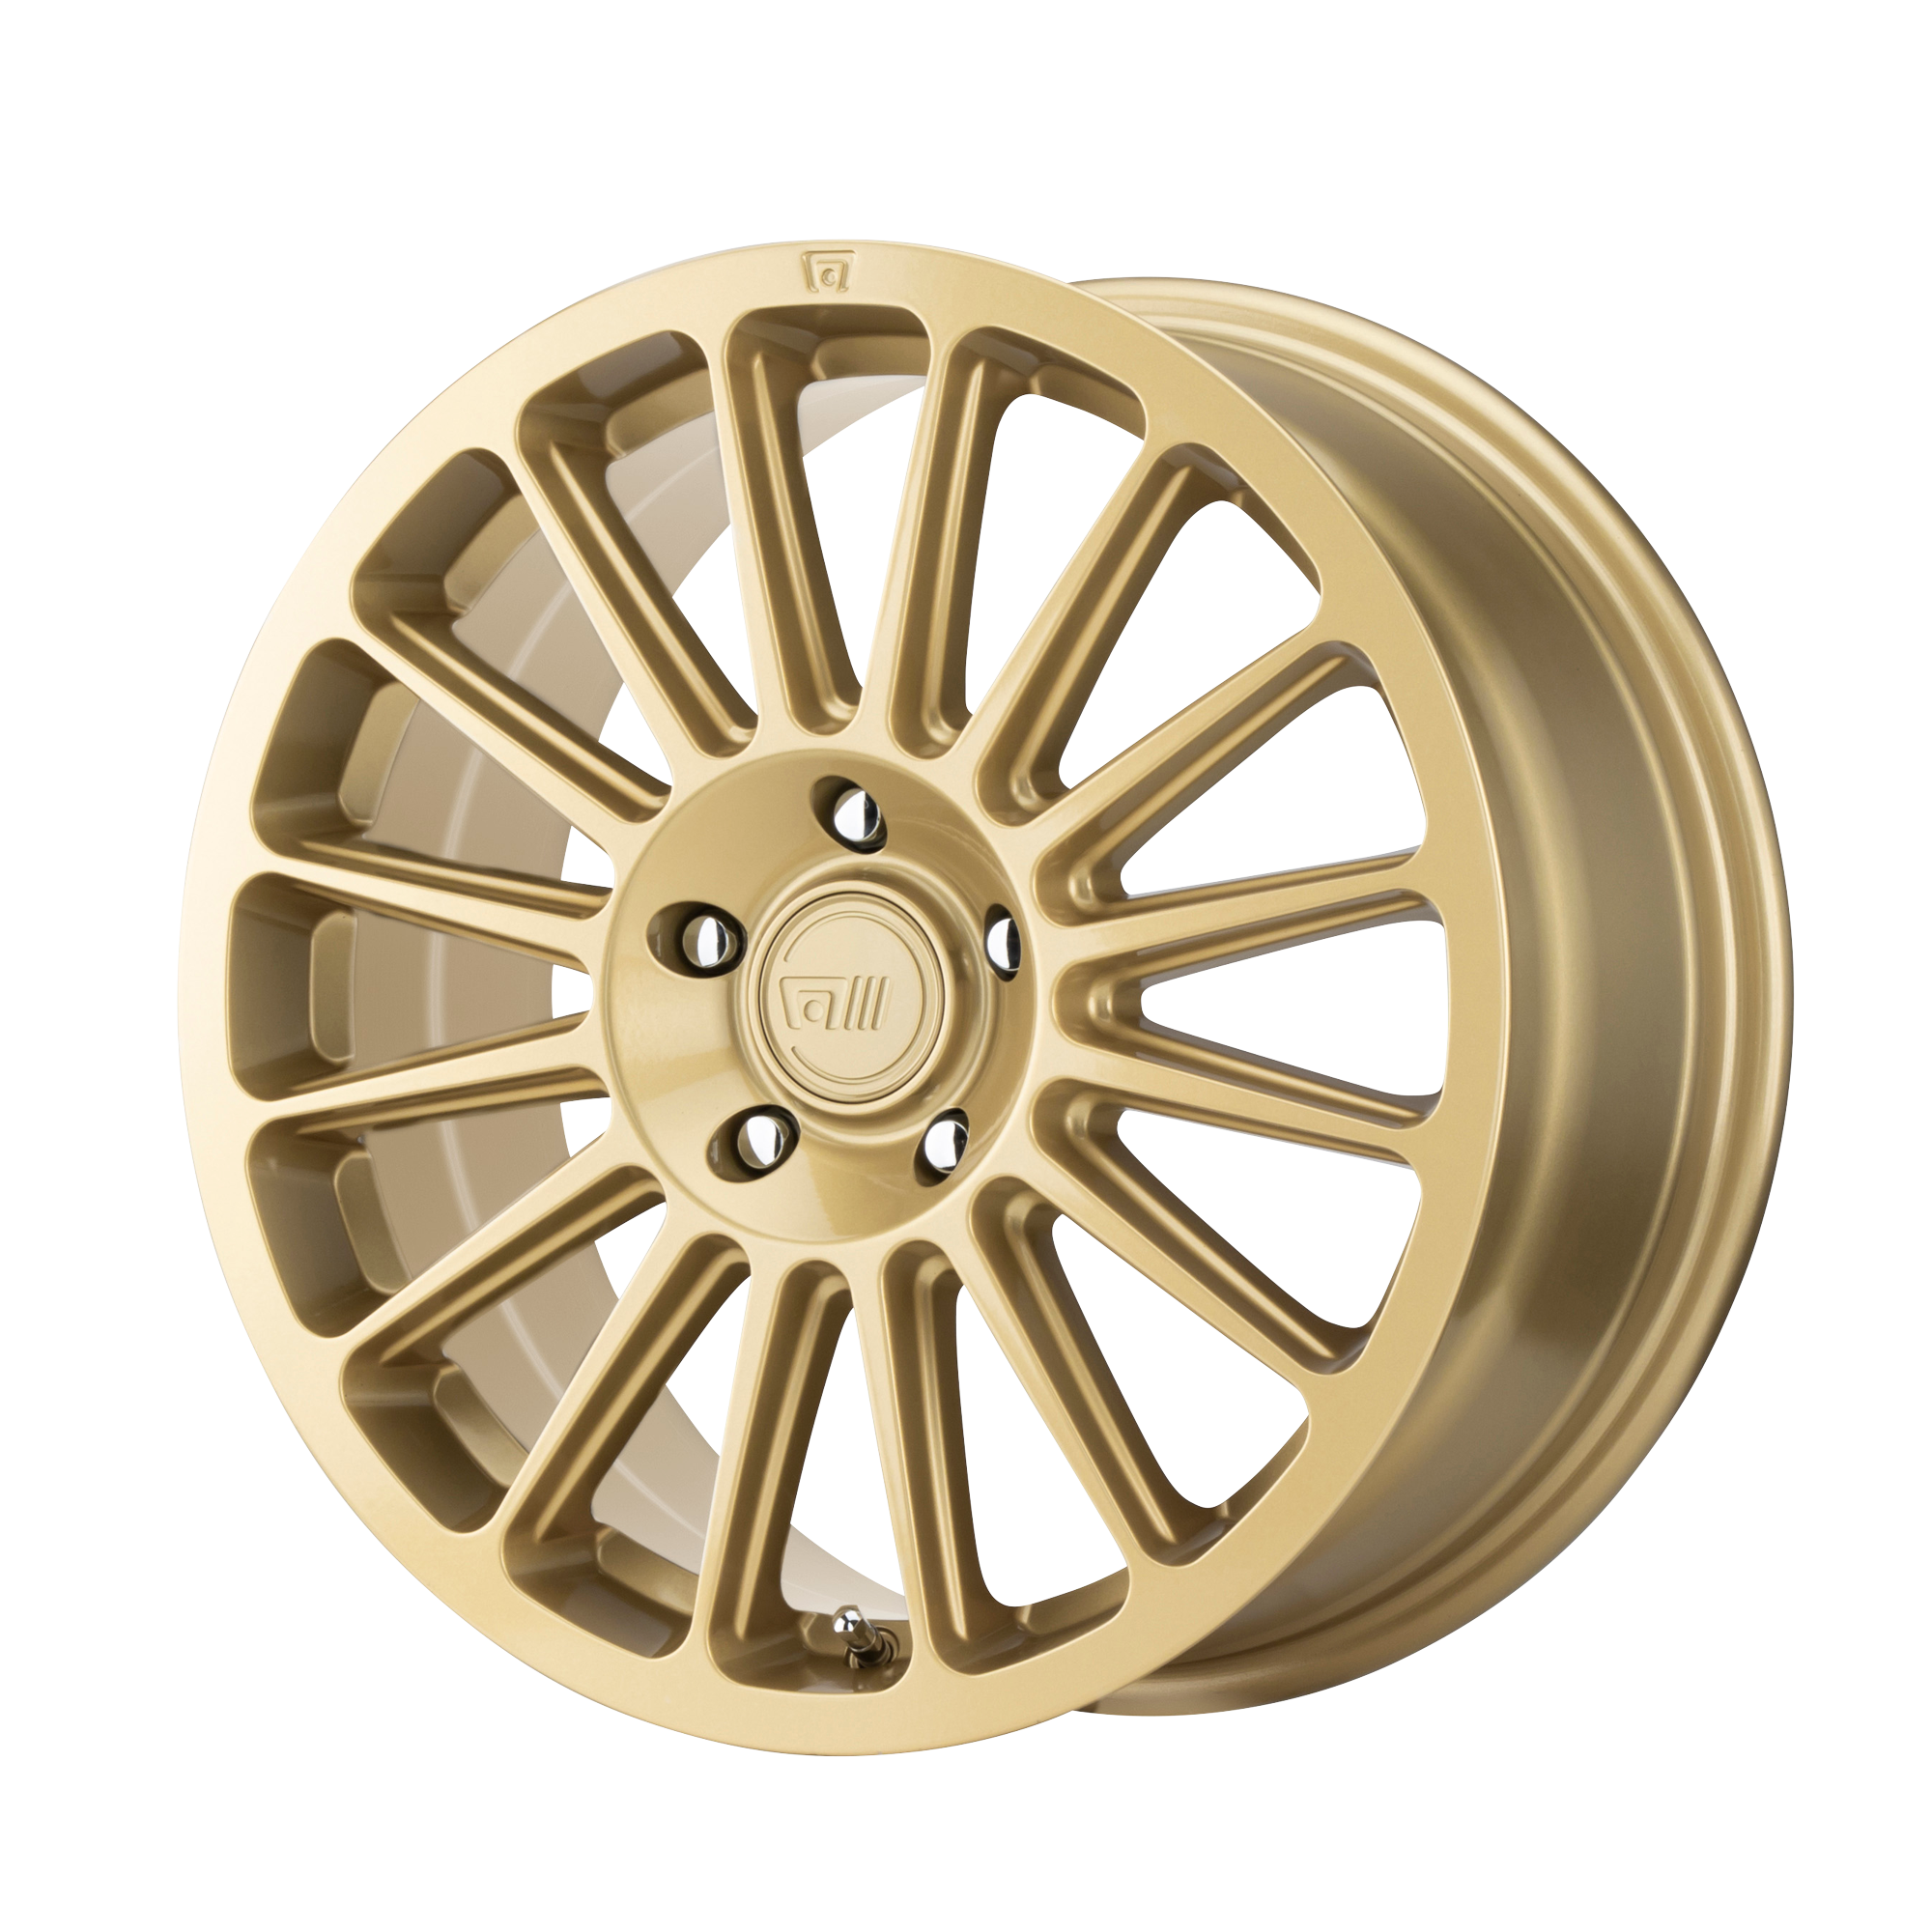 MR141 16x7.5 5x114.30 RALLY GOLD (40 mm) - Tires and Engine Performance